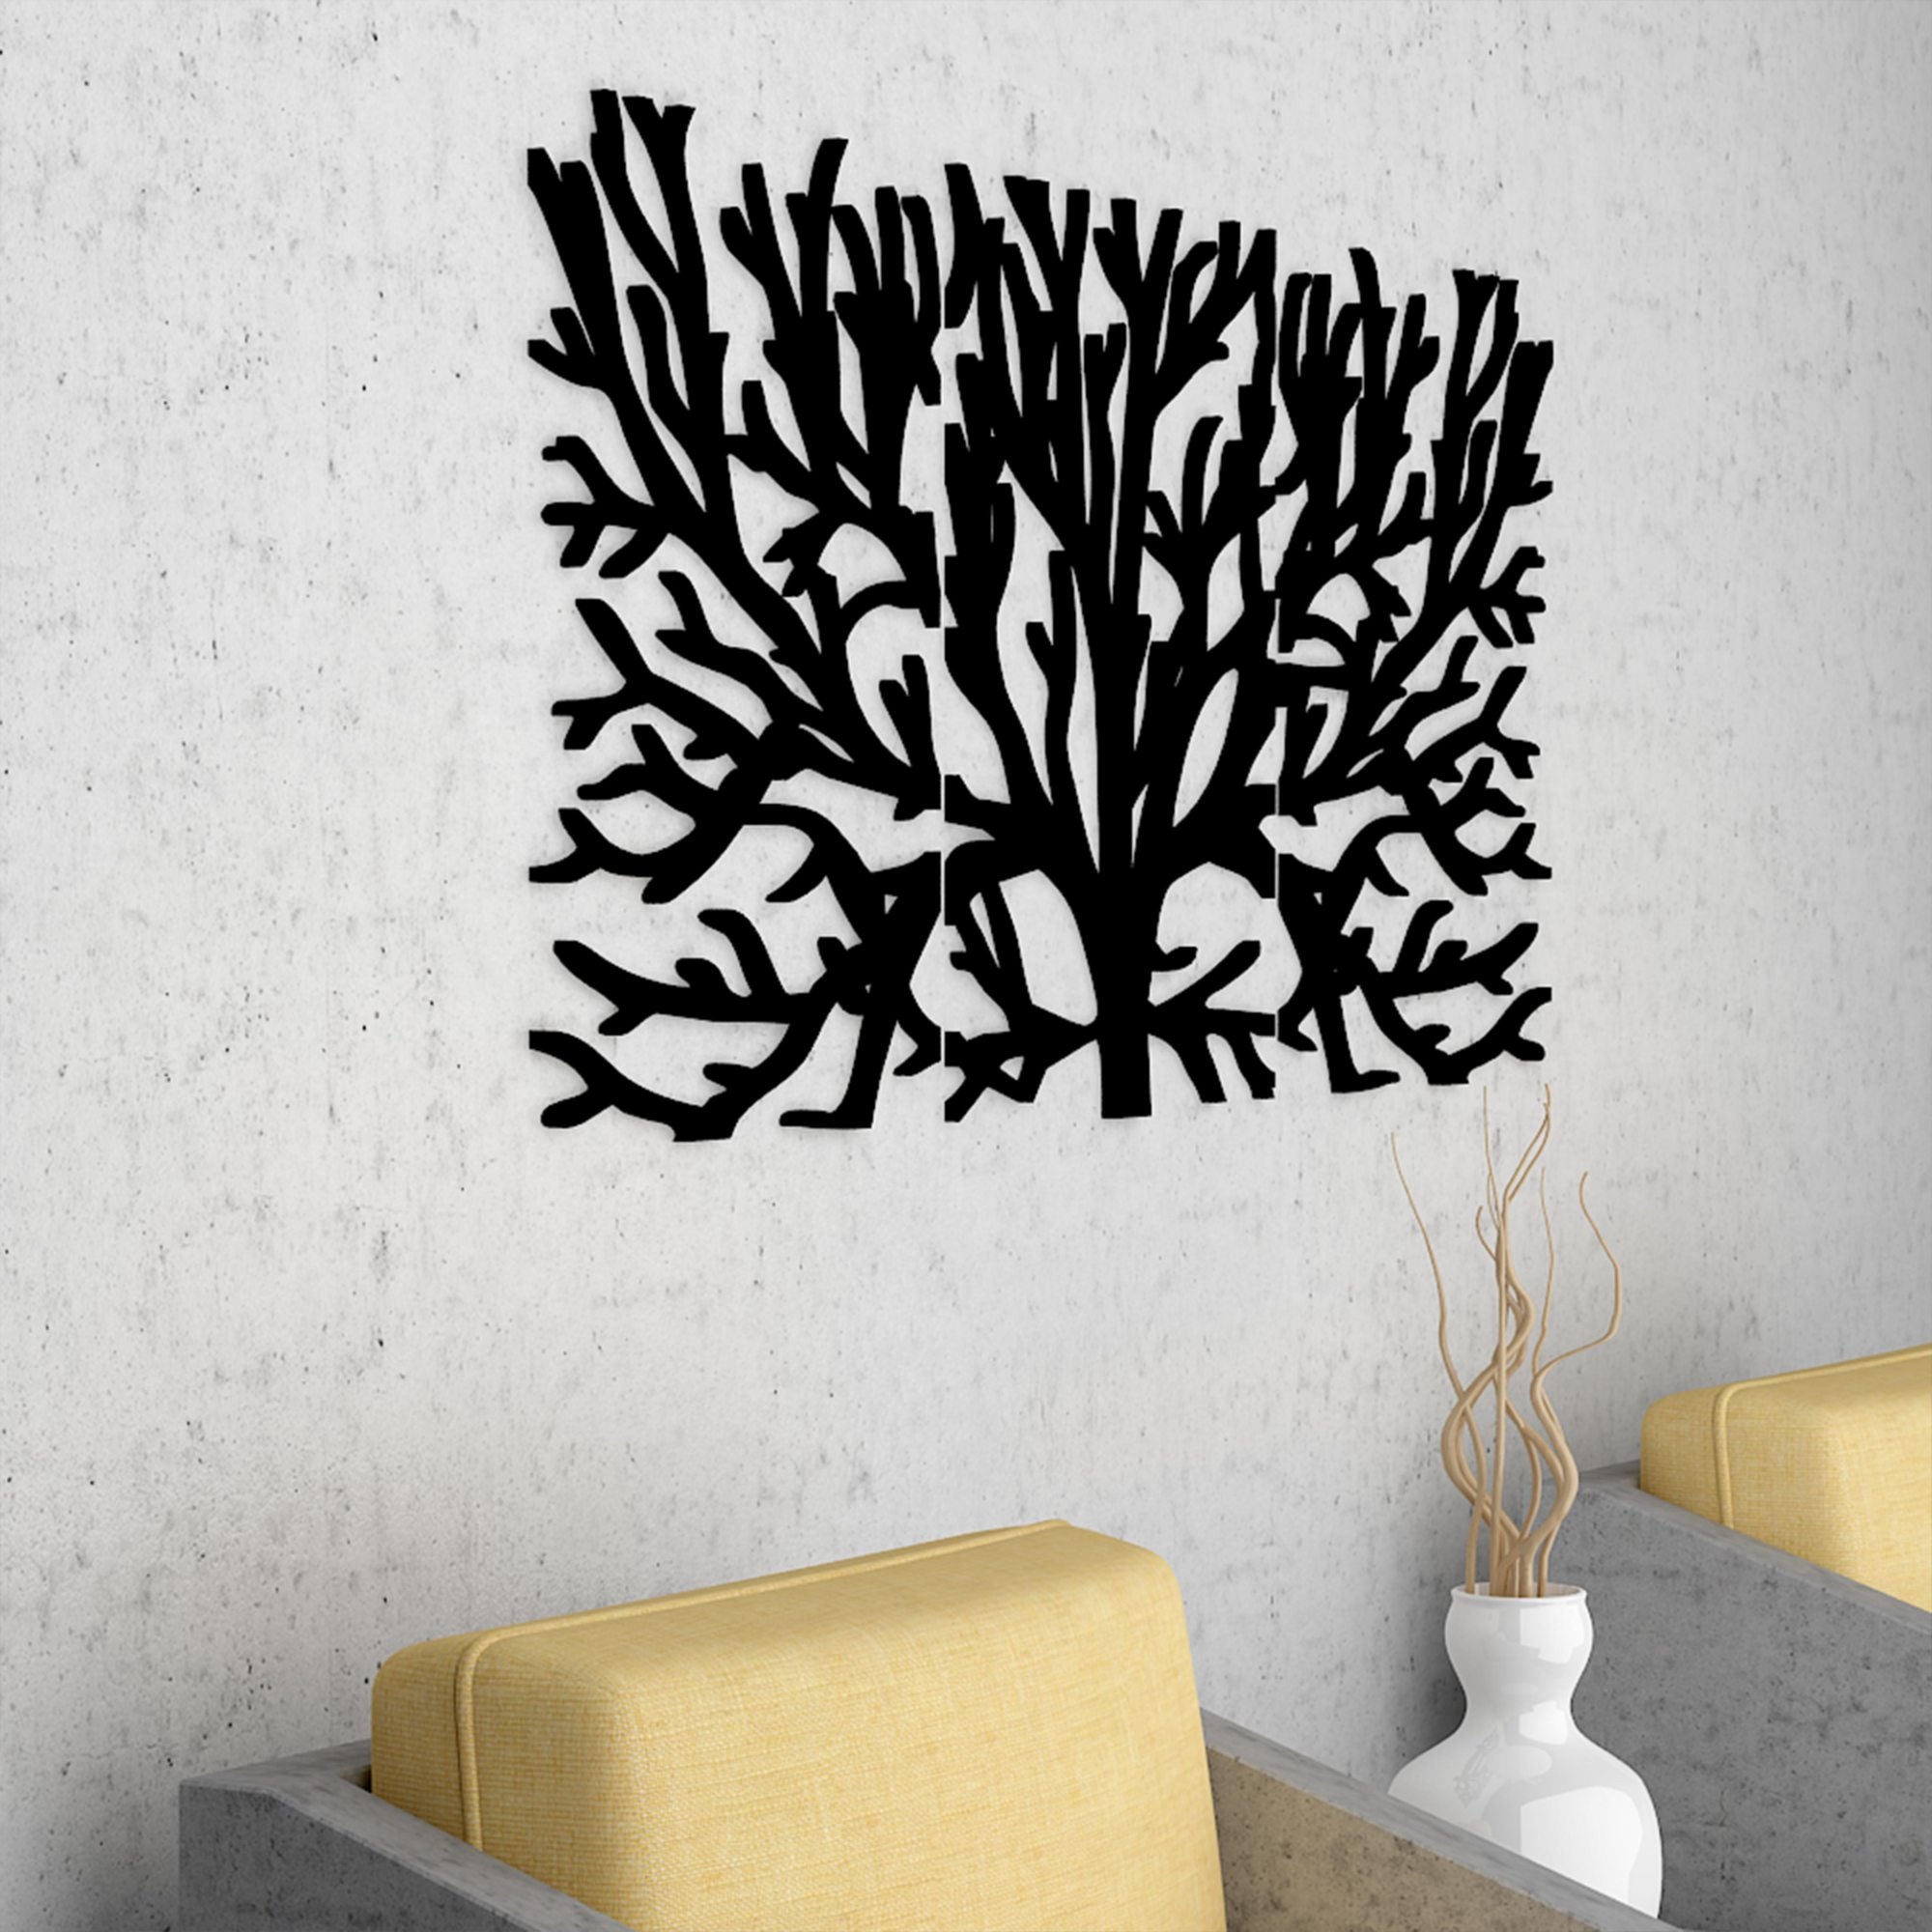  Quality Wooden Wall Hanging of Beautiful Black Color Tree Branches